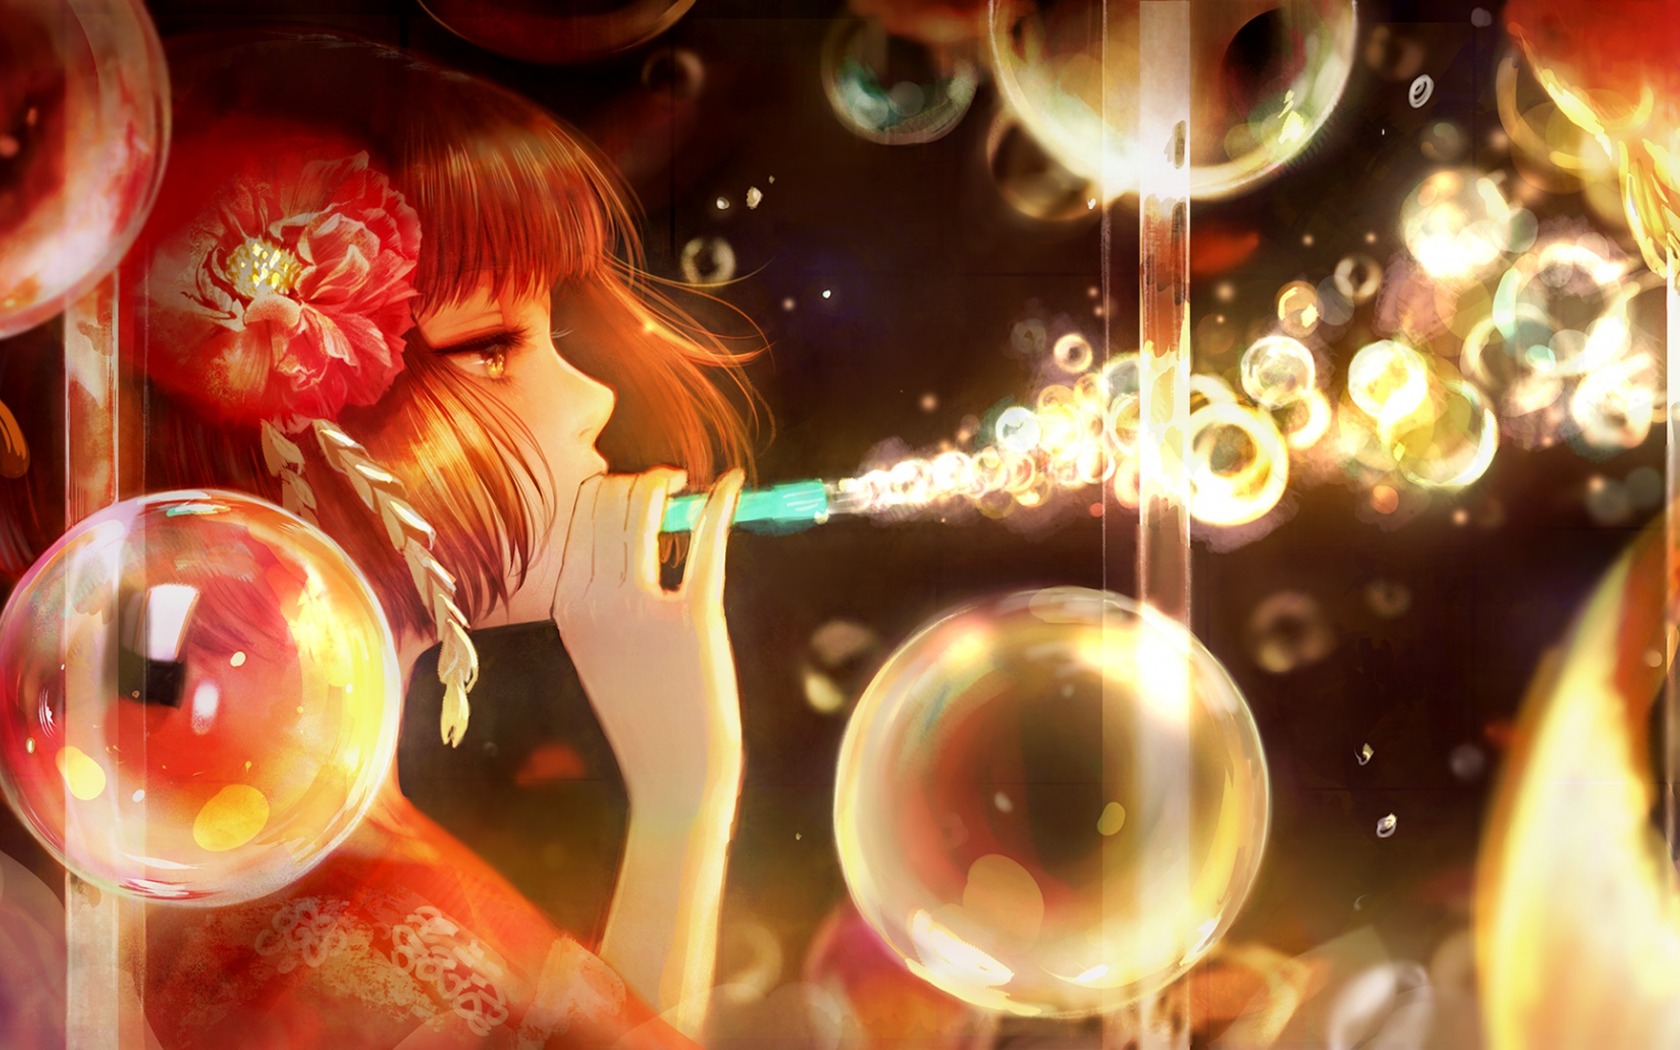 girl, anime, soap bubble Wallpaper, HD Anime 4K Wallpapers, Images